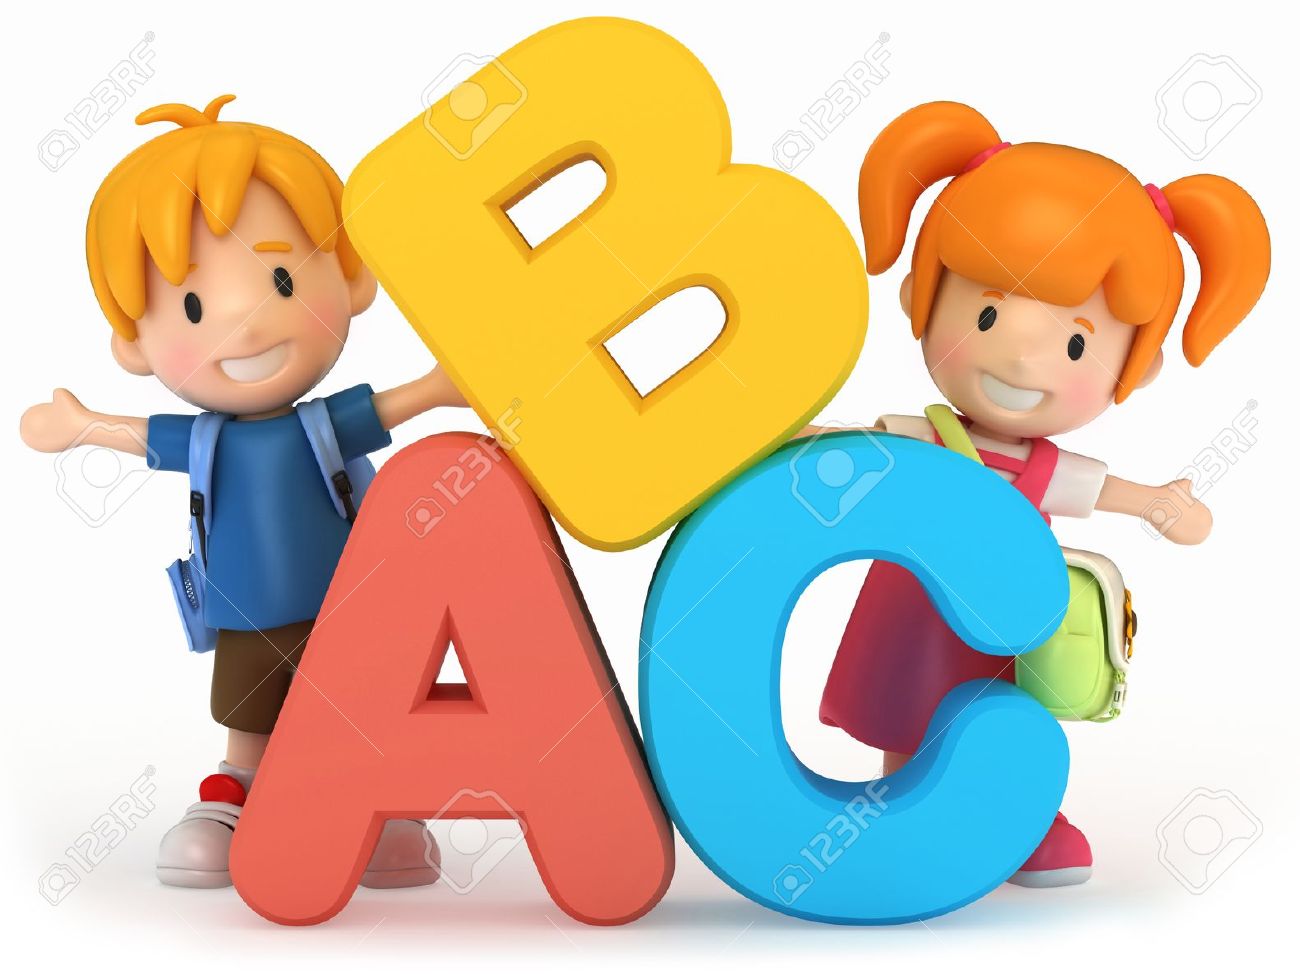 Kids Learning Abc Clipart.